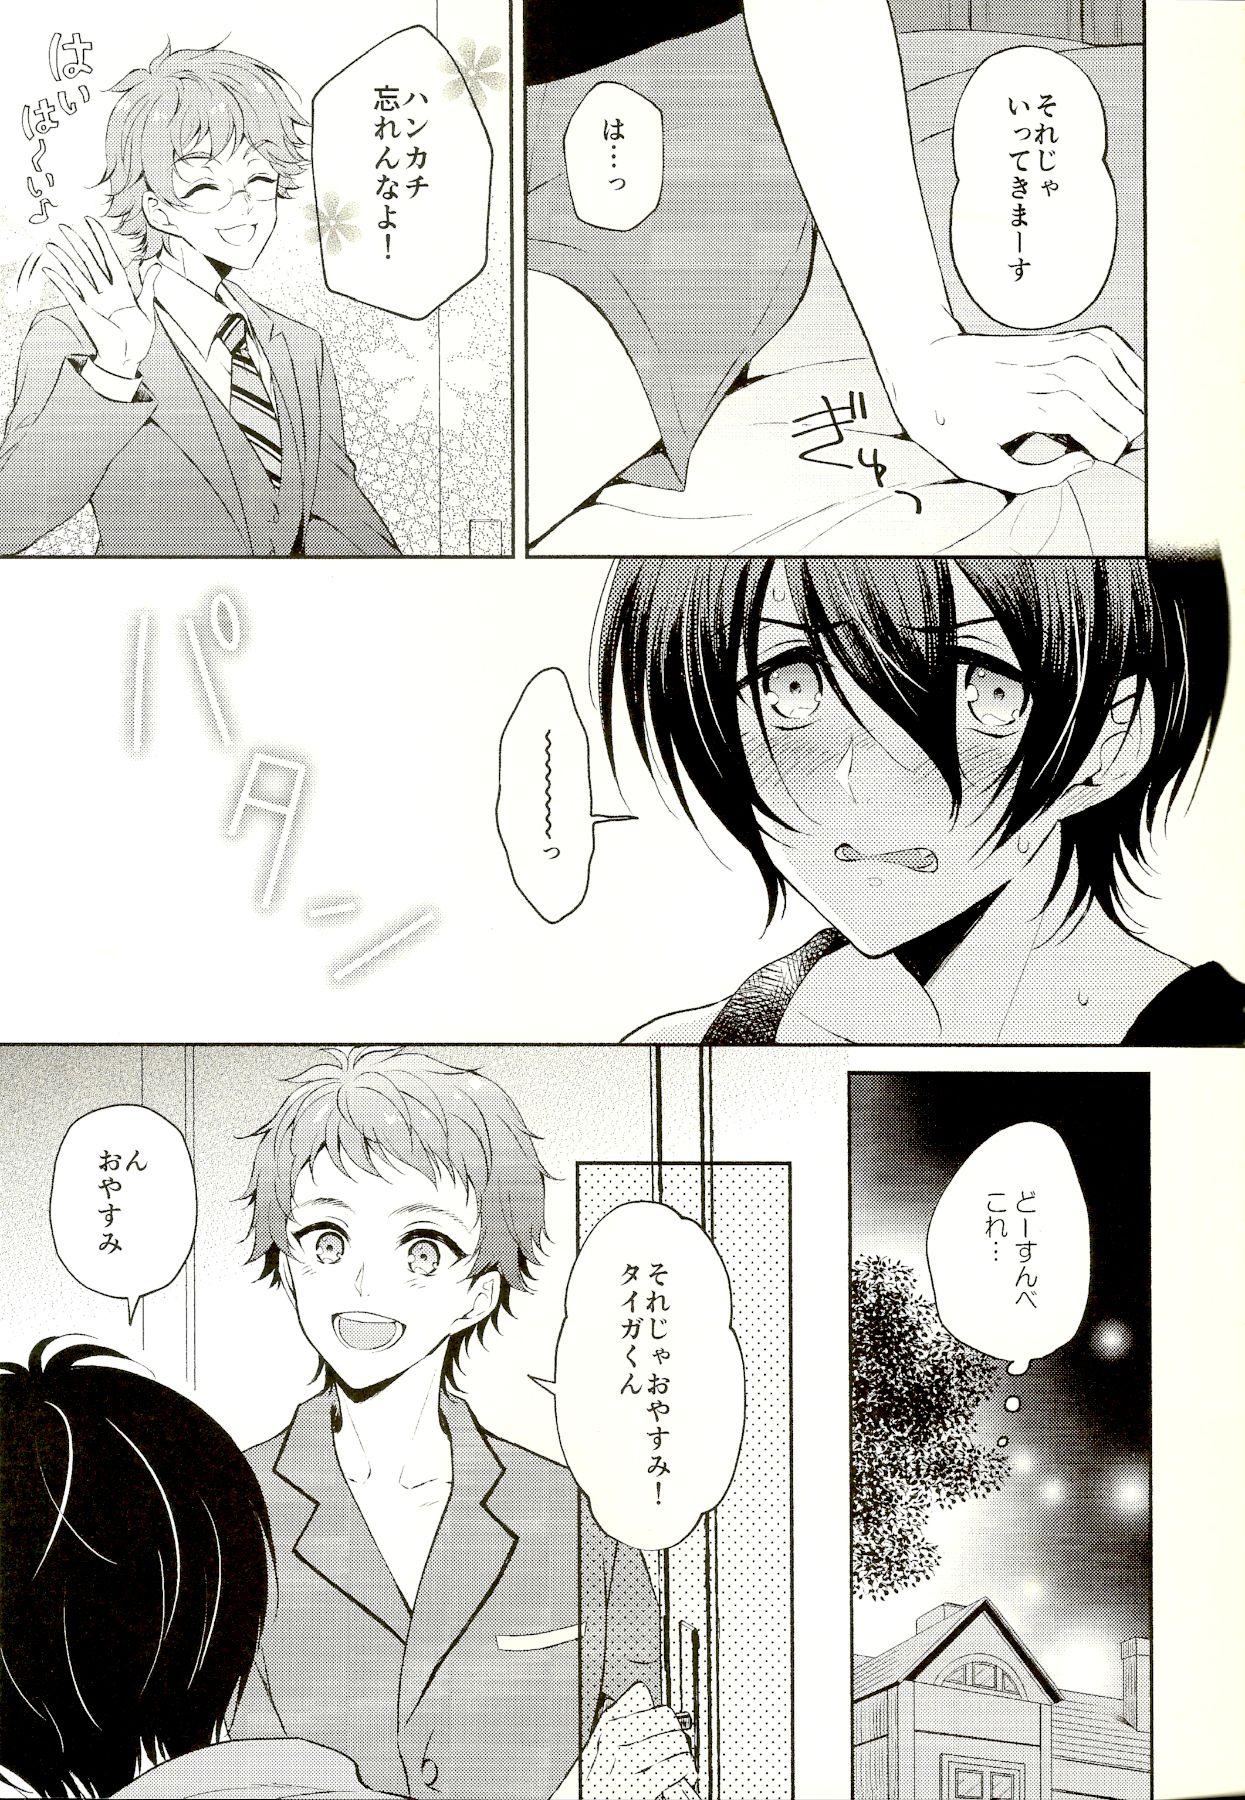 Couch Mayonaka ni Lovecall - Midnight Lovecall - Pretty rhythm Married - Page 5